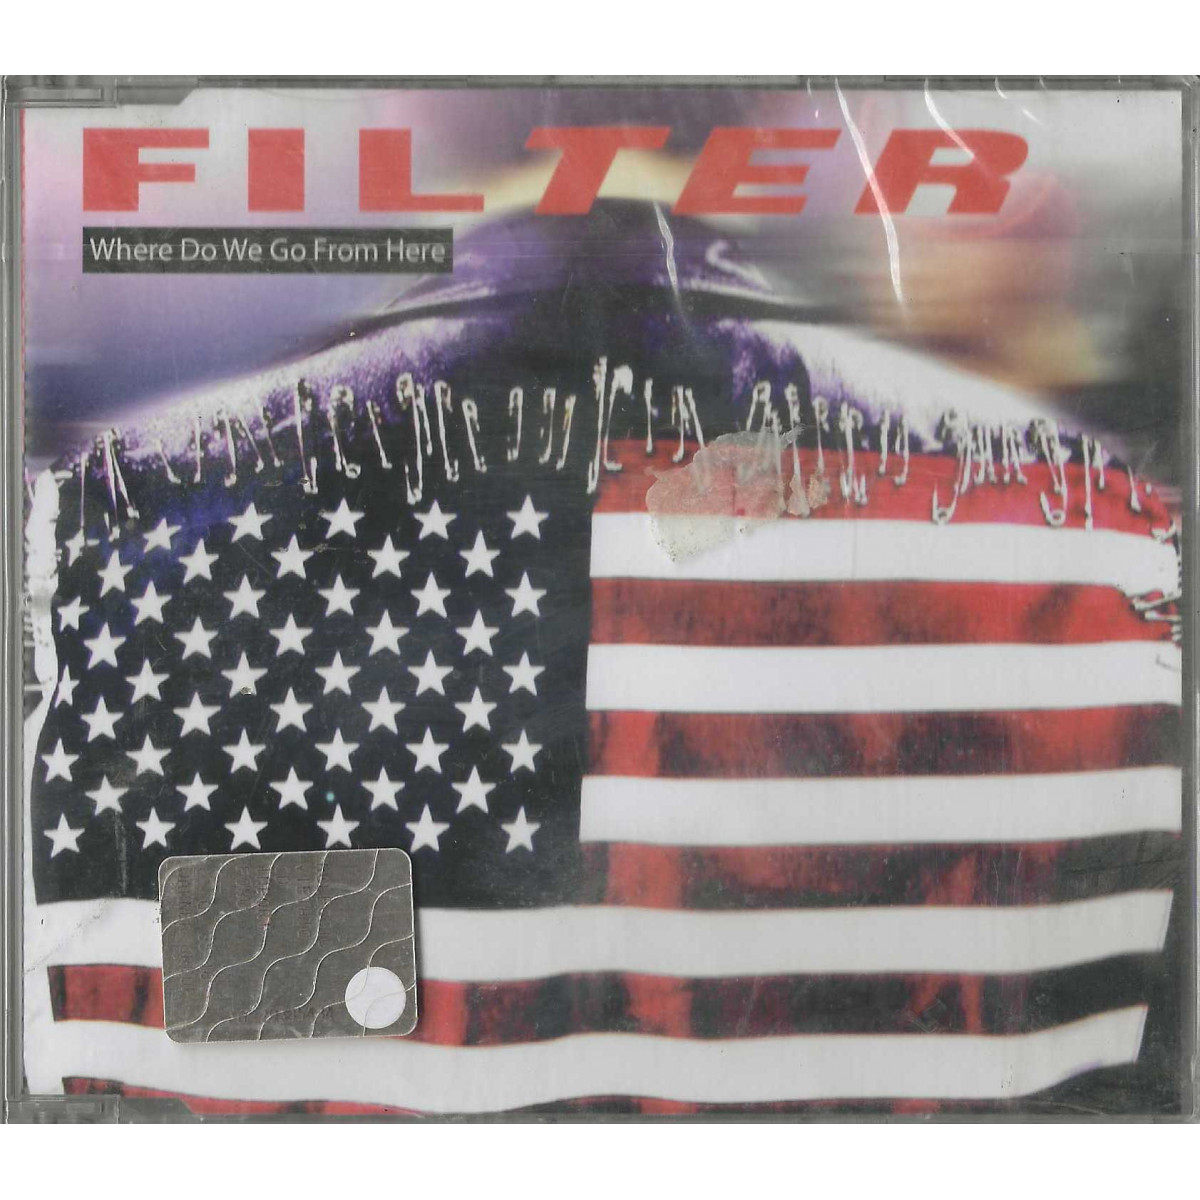 Filter CD 'S Singolo Where Do We Go From Here / Reprise – 9362424682